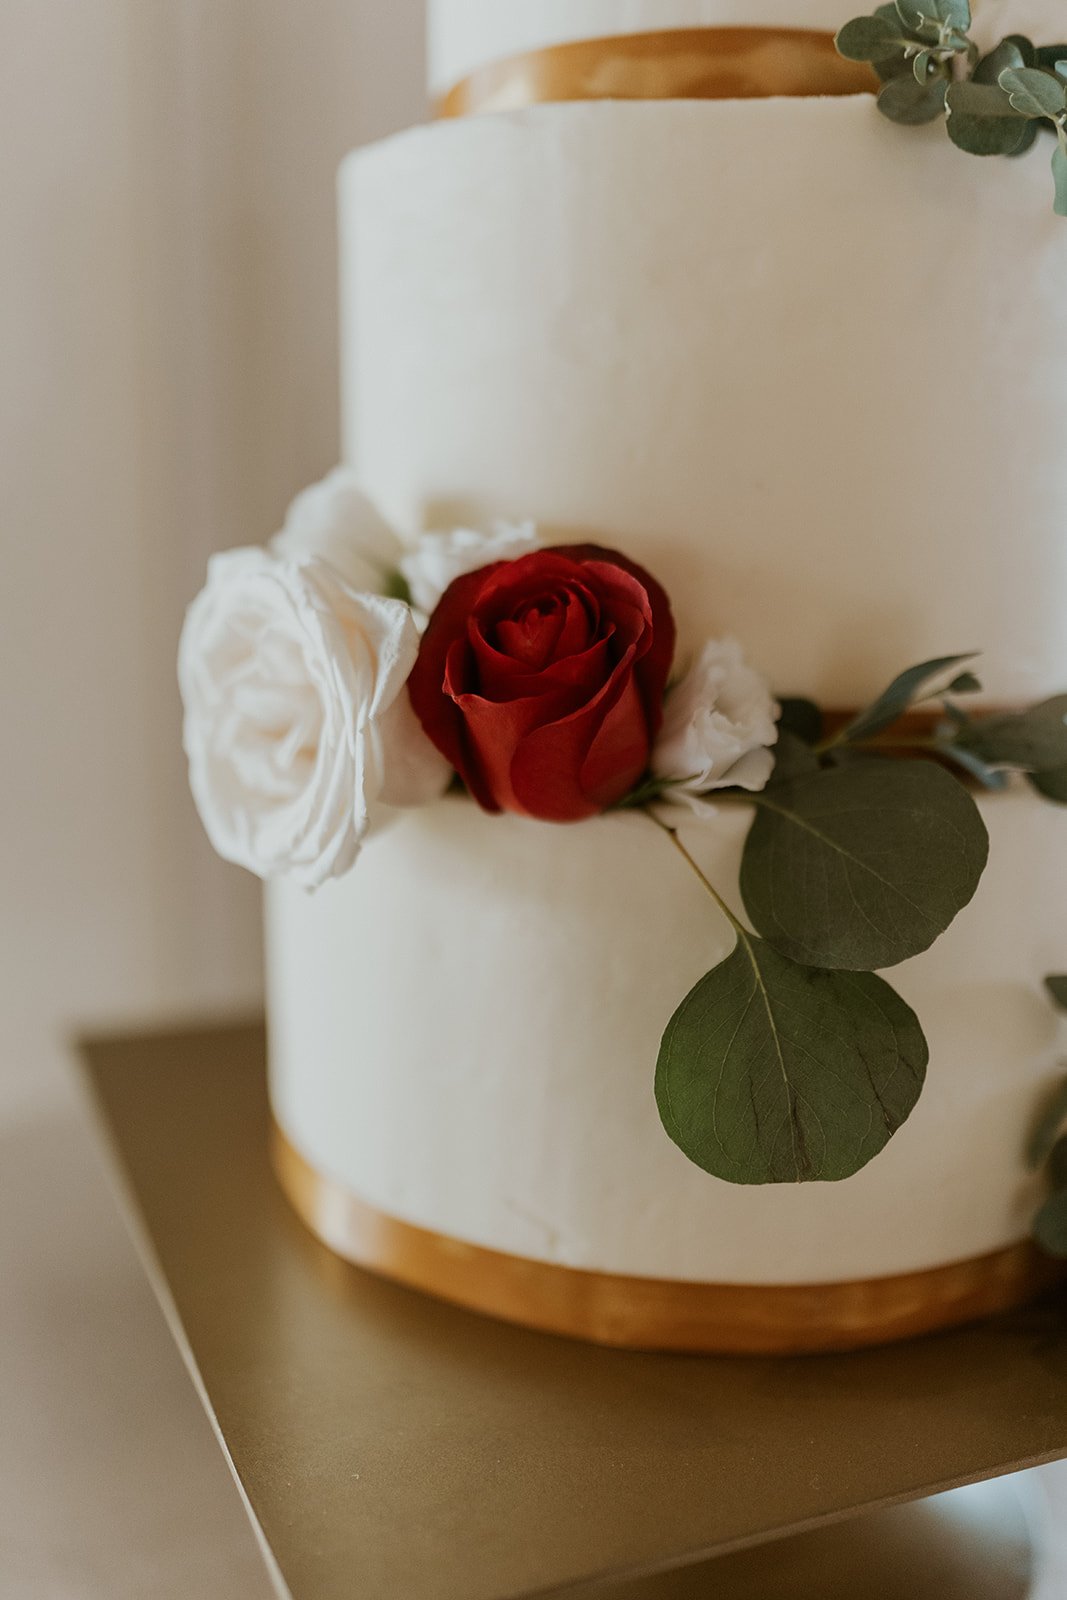 Simple modern cake decorated in white roses with a single red rose and greenery.